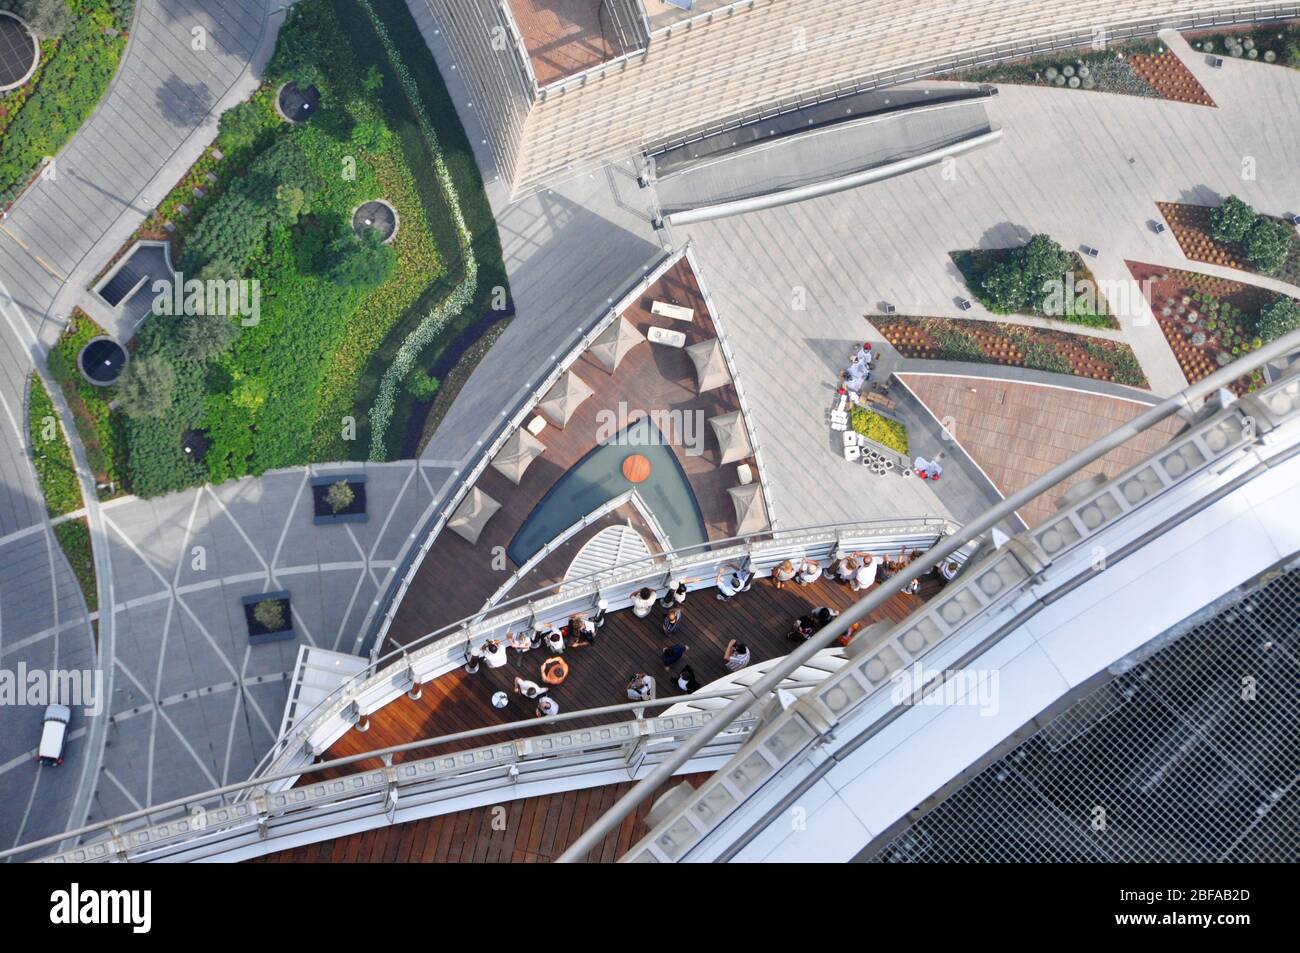 The Burj Khalifa's observation deck. It is located on level 124 of the world's tallest tower. Shot from above, birds-eye view. Landscape format Stock Photo